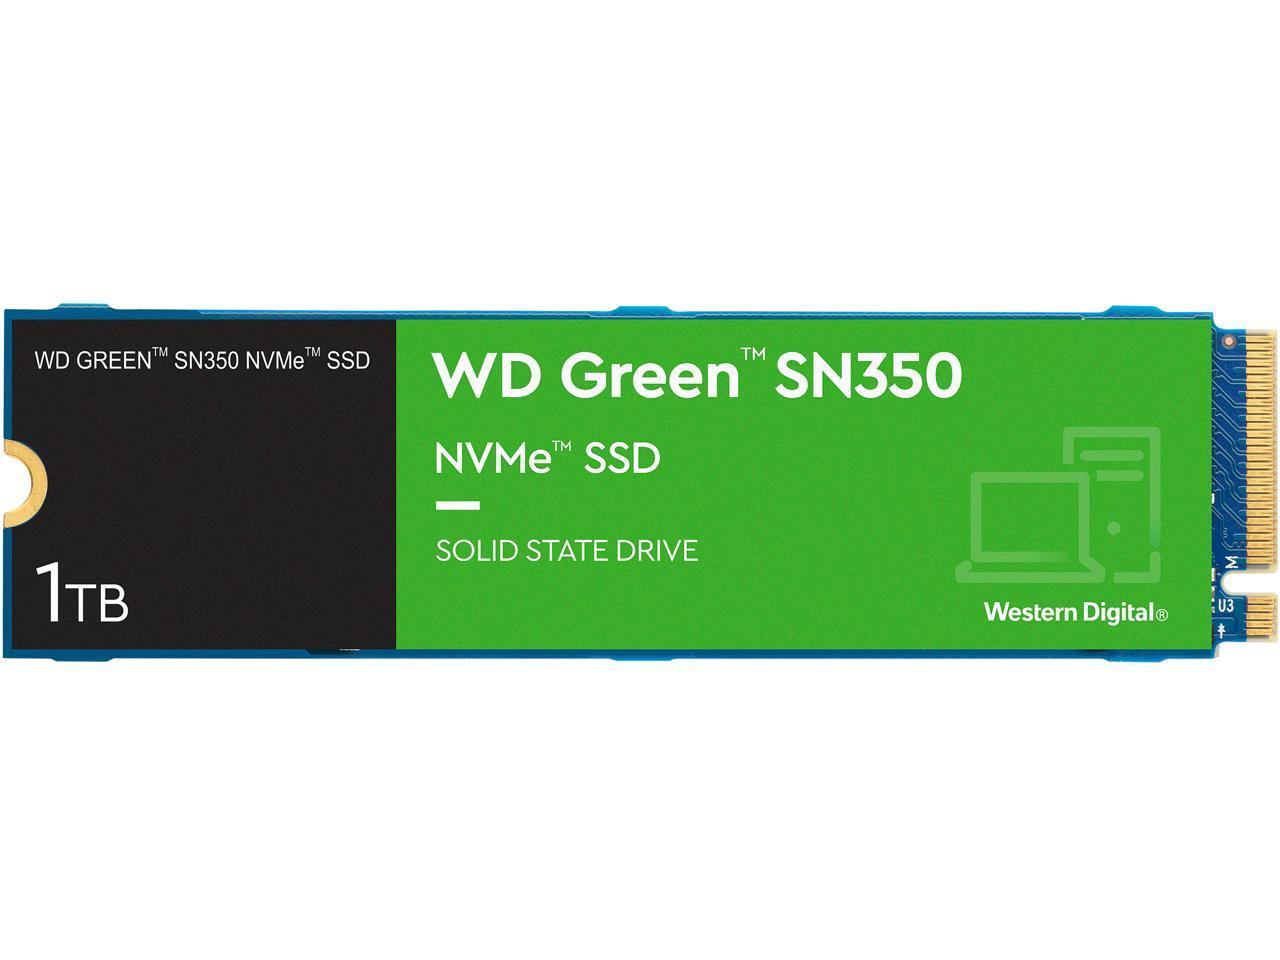 1TB WD Green SN350 QLC M2 PCIe NVMe SSD for $34.99 Shipped